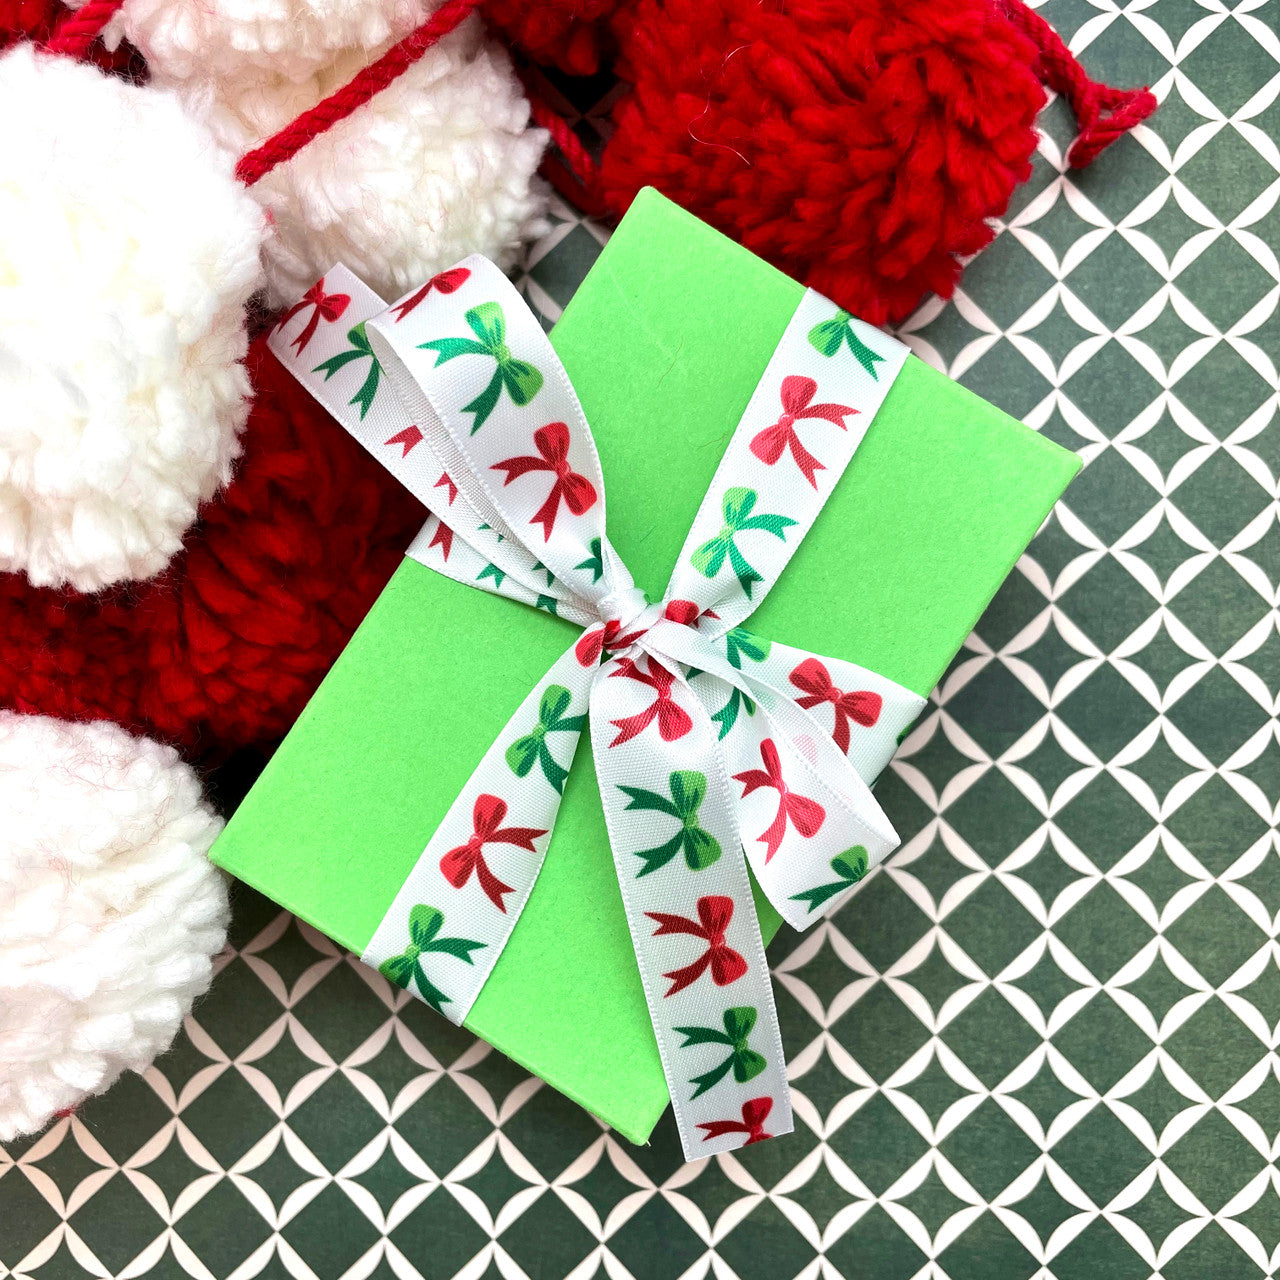 Tie a fun little package with our Christmas bows to bring a smile anyone's face!